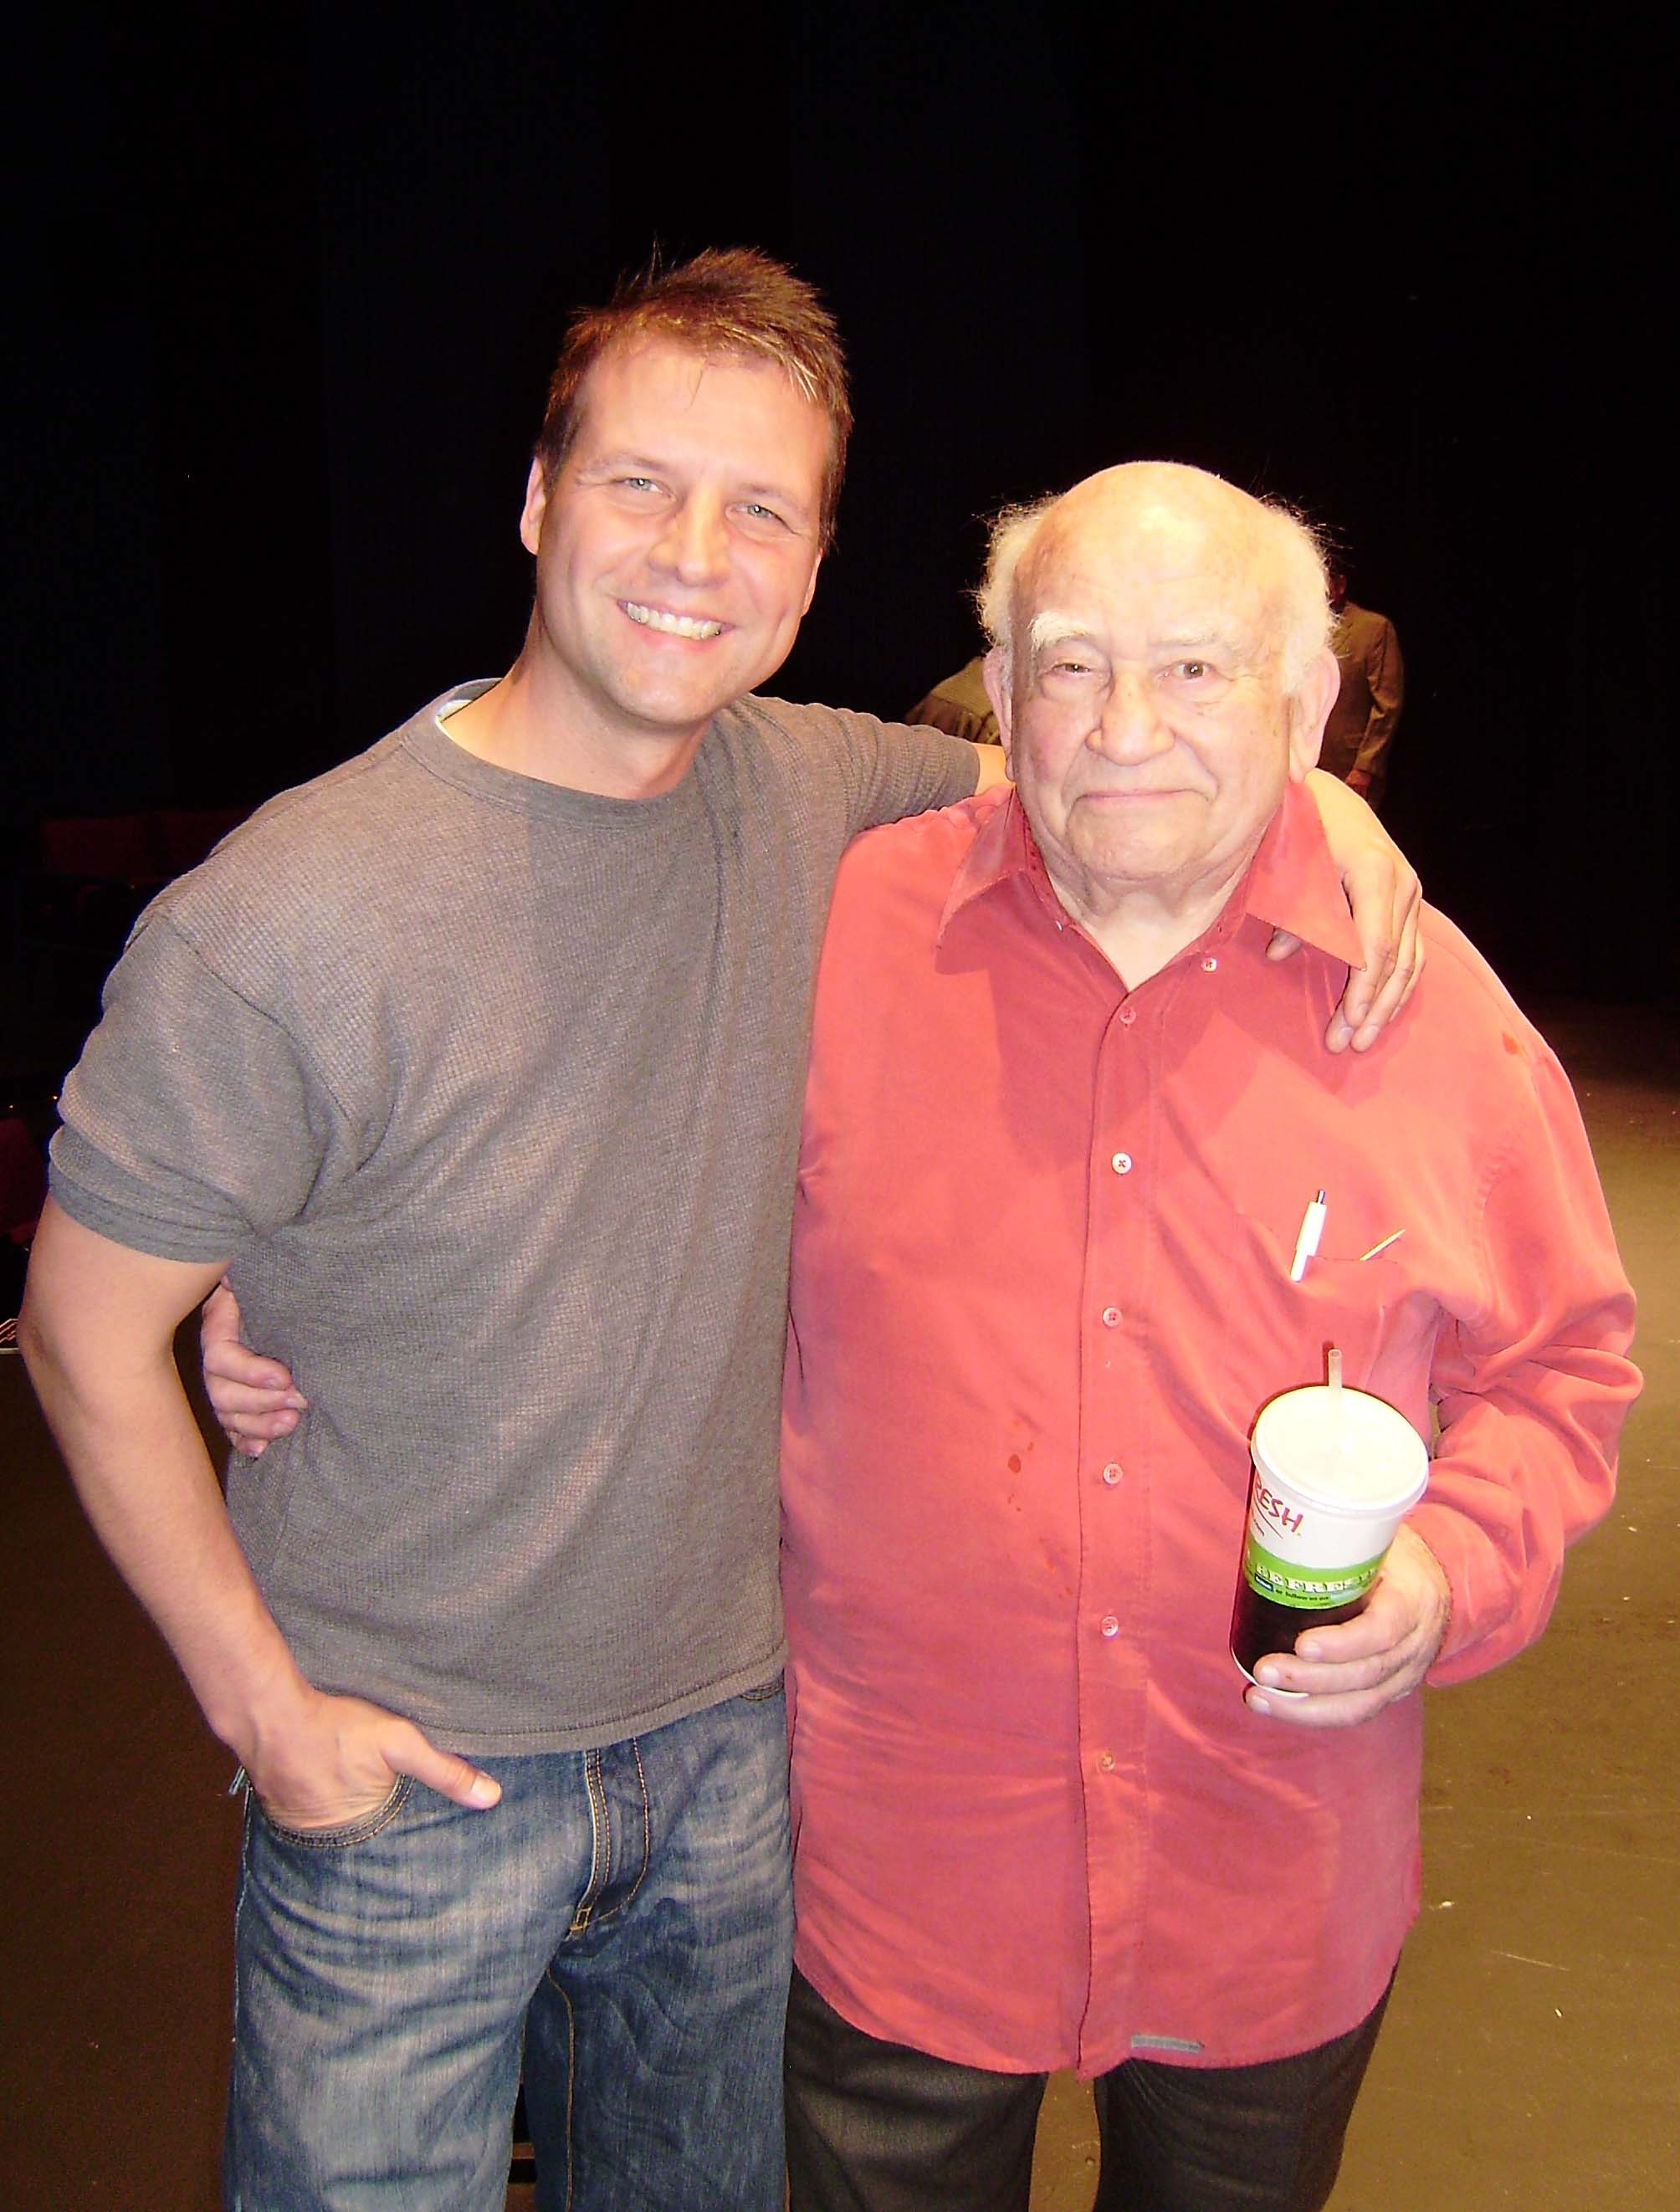 Tim Slaske and Ed Asner on stage at the Falcon Theatre, Burbank